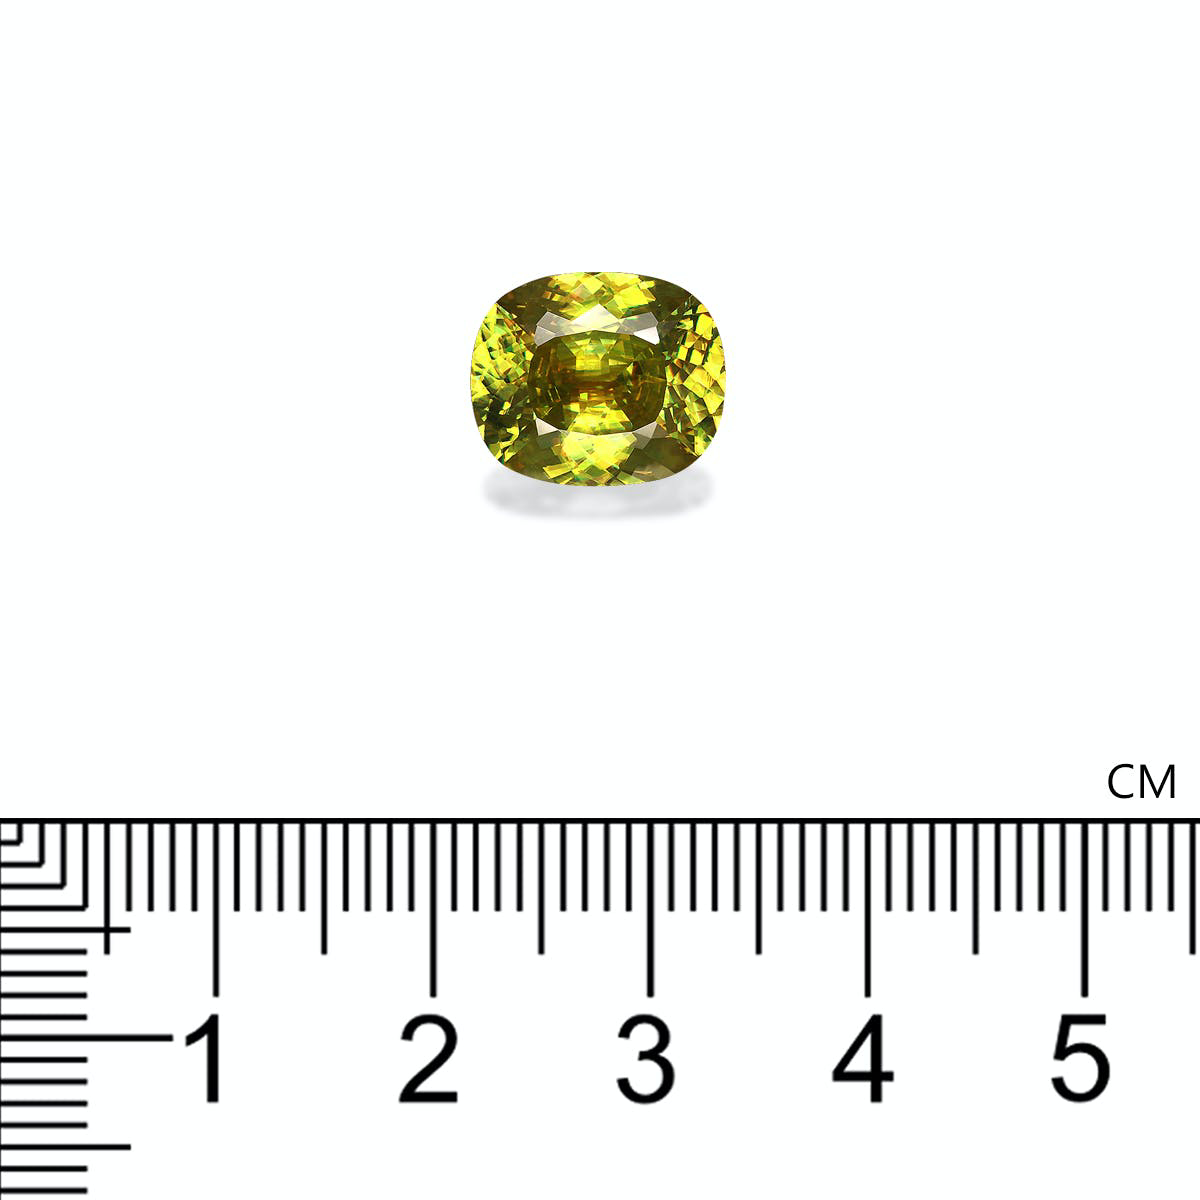 Picture of Lime Green Sphene 4.97ct (SH0640)